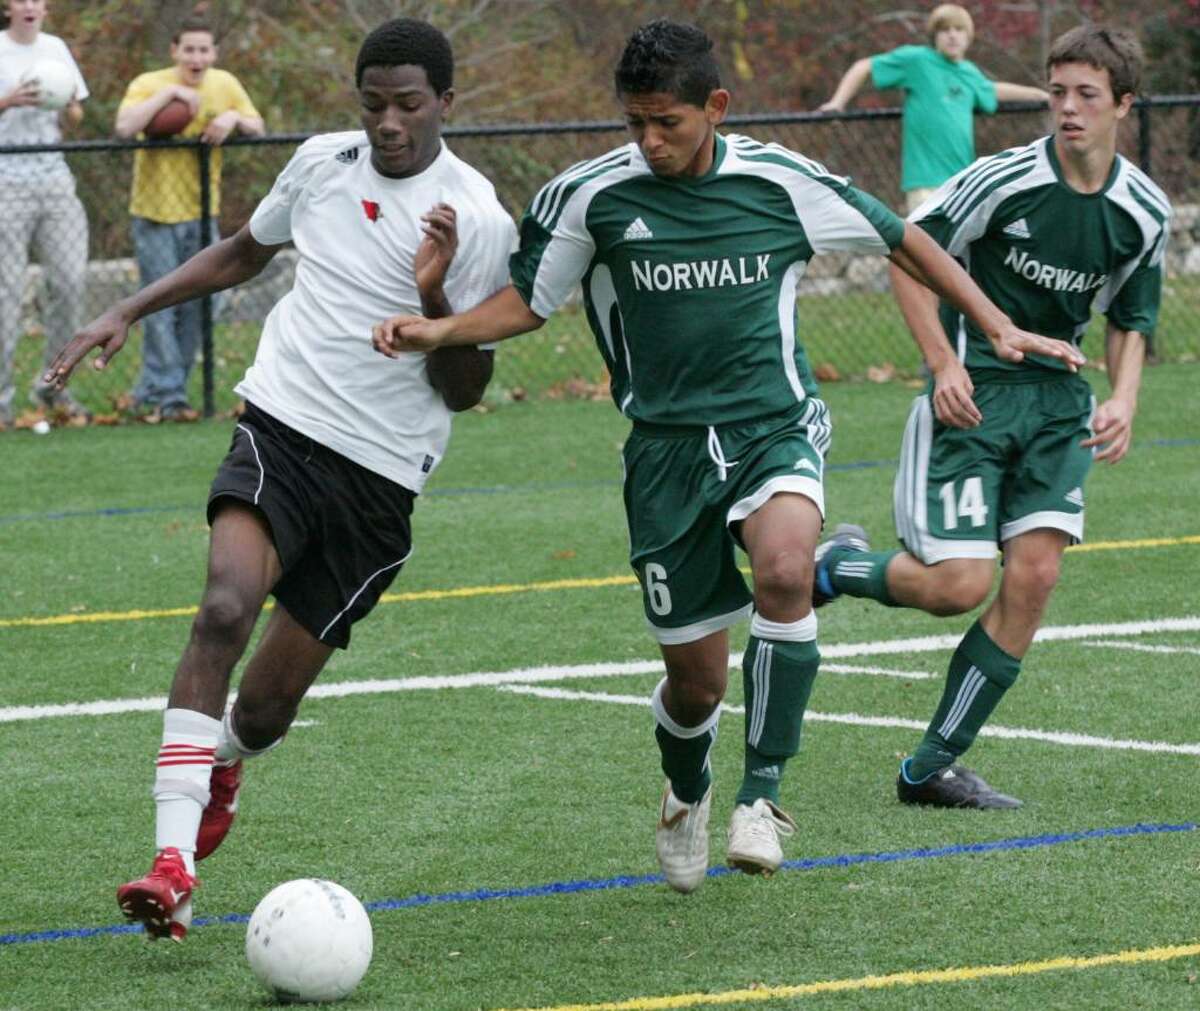 Greenwich High School striker Kenny Doublette makes his way toward the goal as Norwalk defenders Erick Romero and Chris Jeffrey put on the pressure. Mr. Doublette scored the only goal in the Cardinal's win over Norwalk.